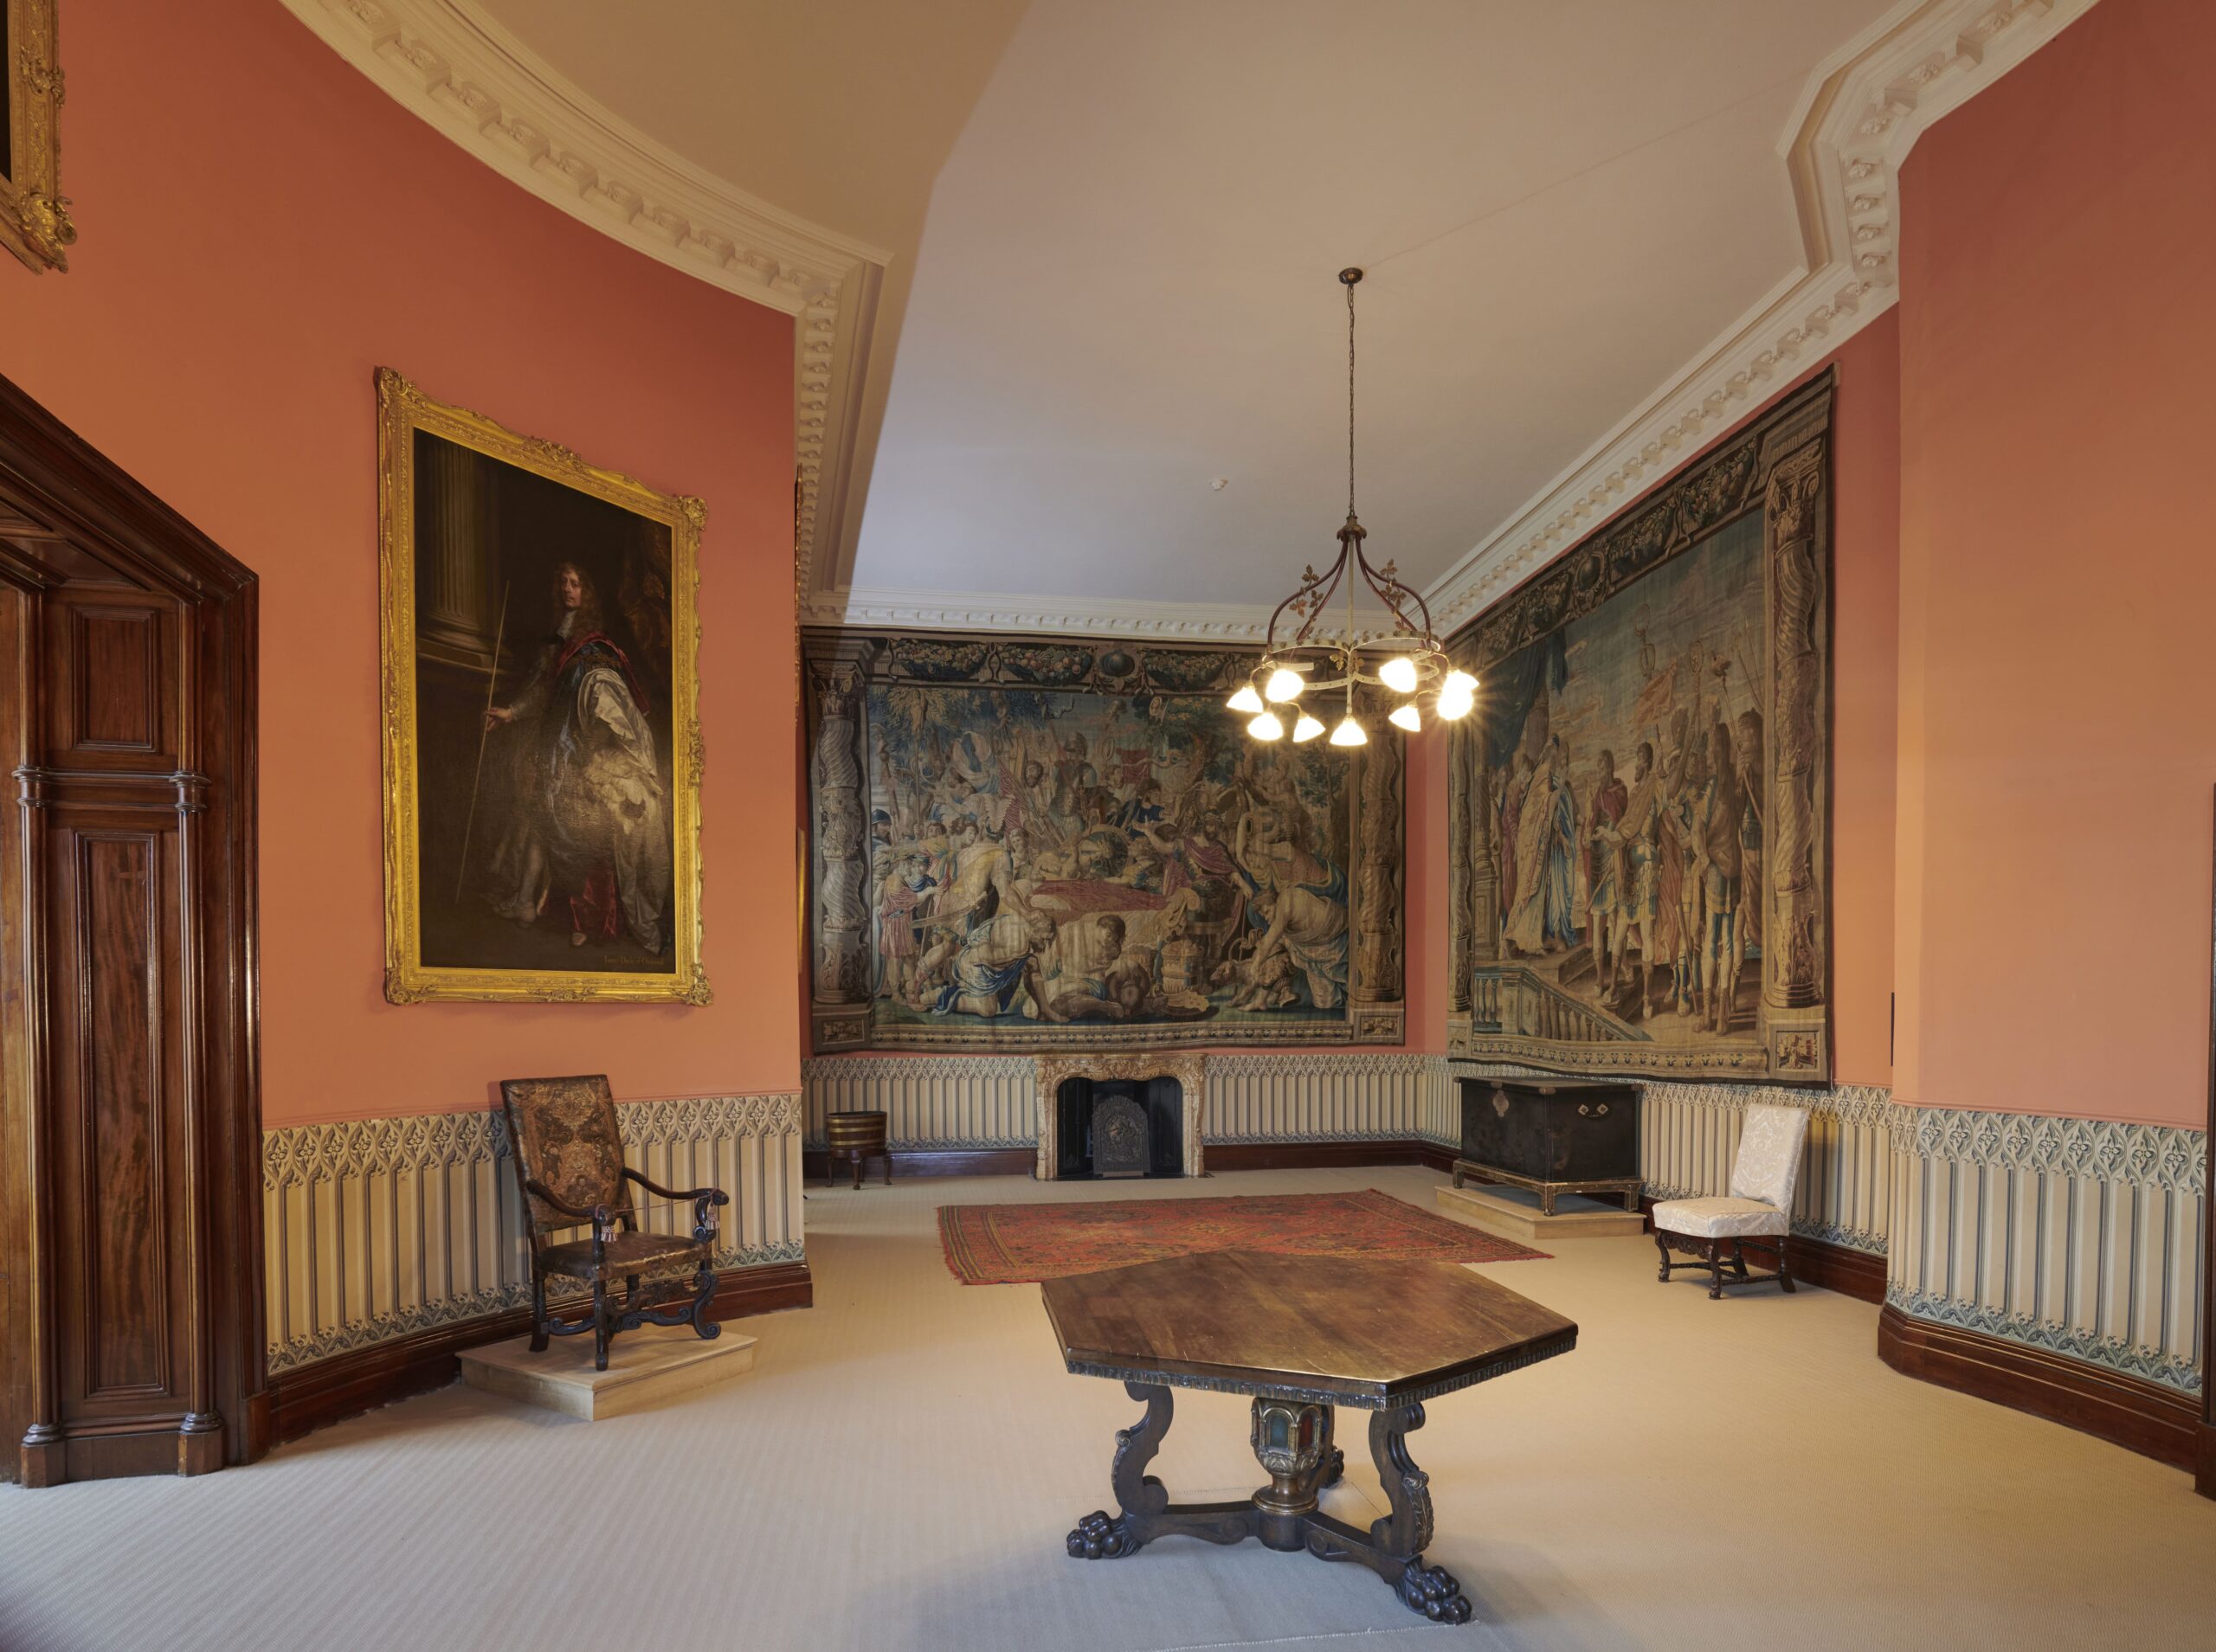 View of the Tapestry Room